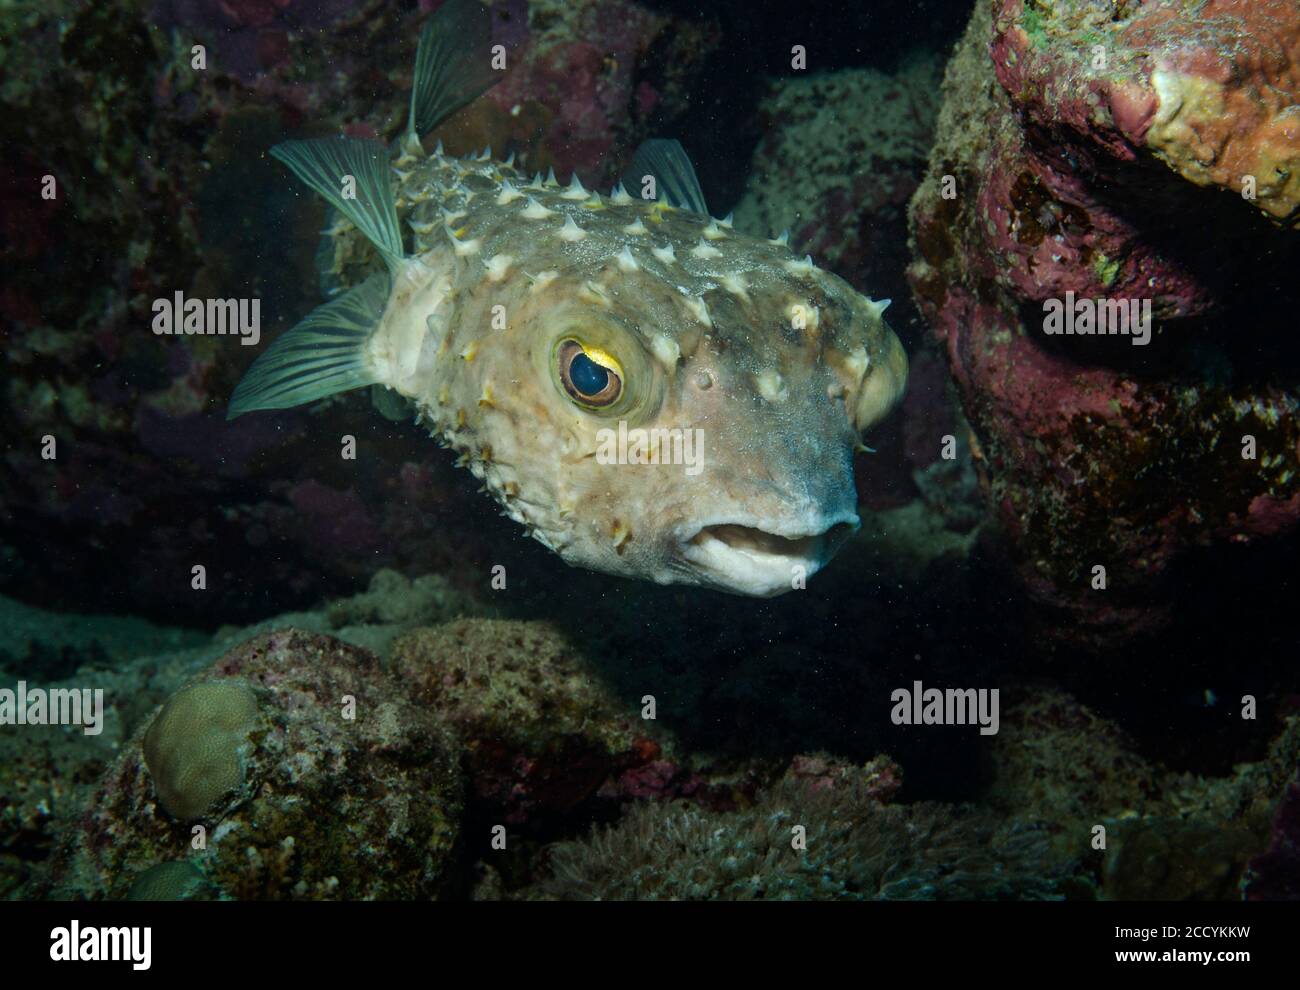 Yellow spotted burrfish, Cyclichthys spilostylus, on coral reef, Marsa Alam, Red sea, Egypt Stock Photo